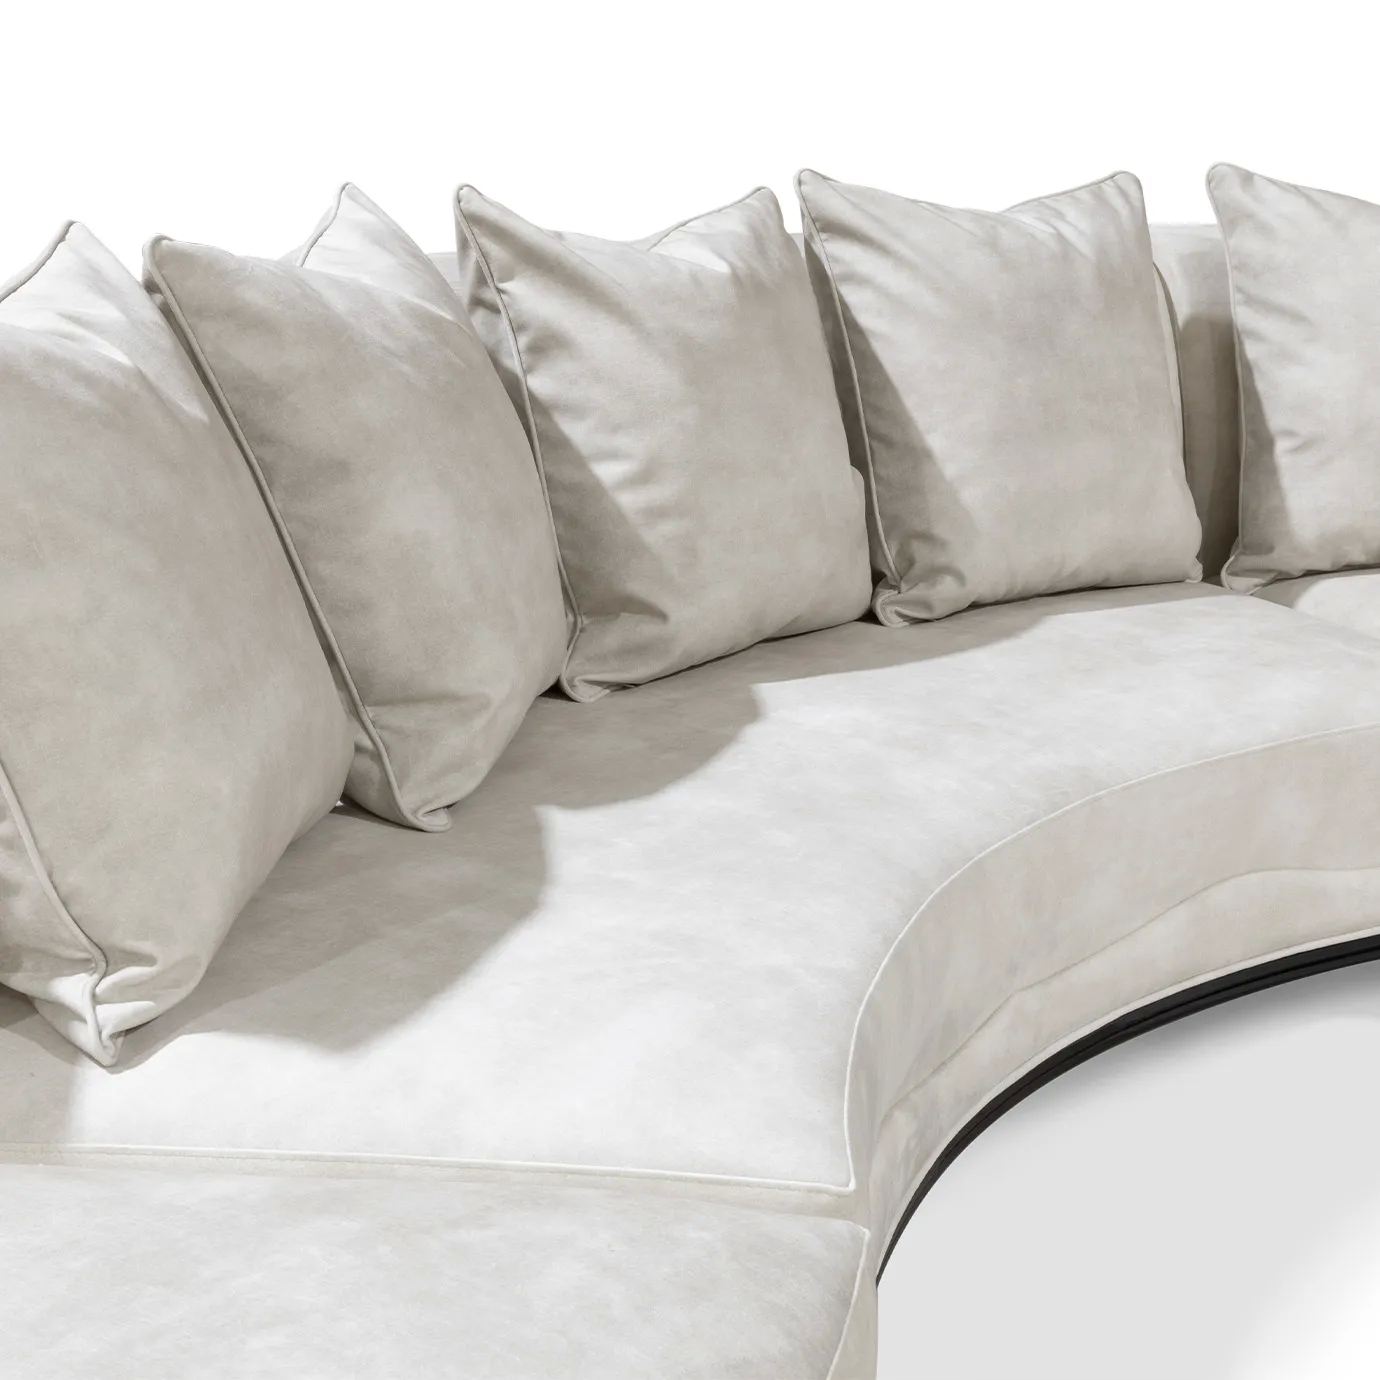 Blissful arcs curve to form the Heavenly Sofa.